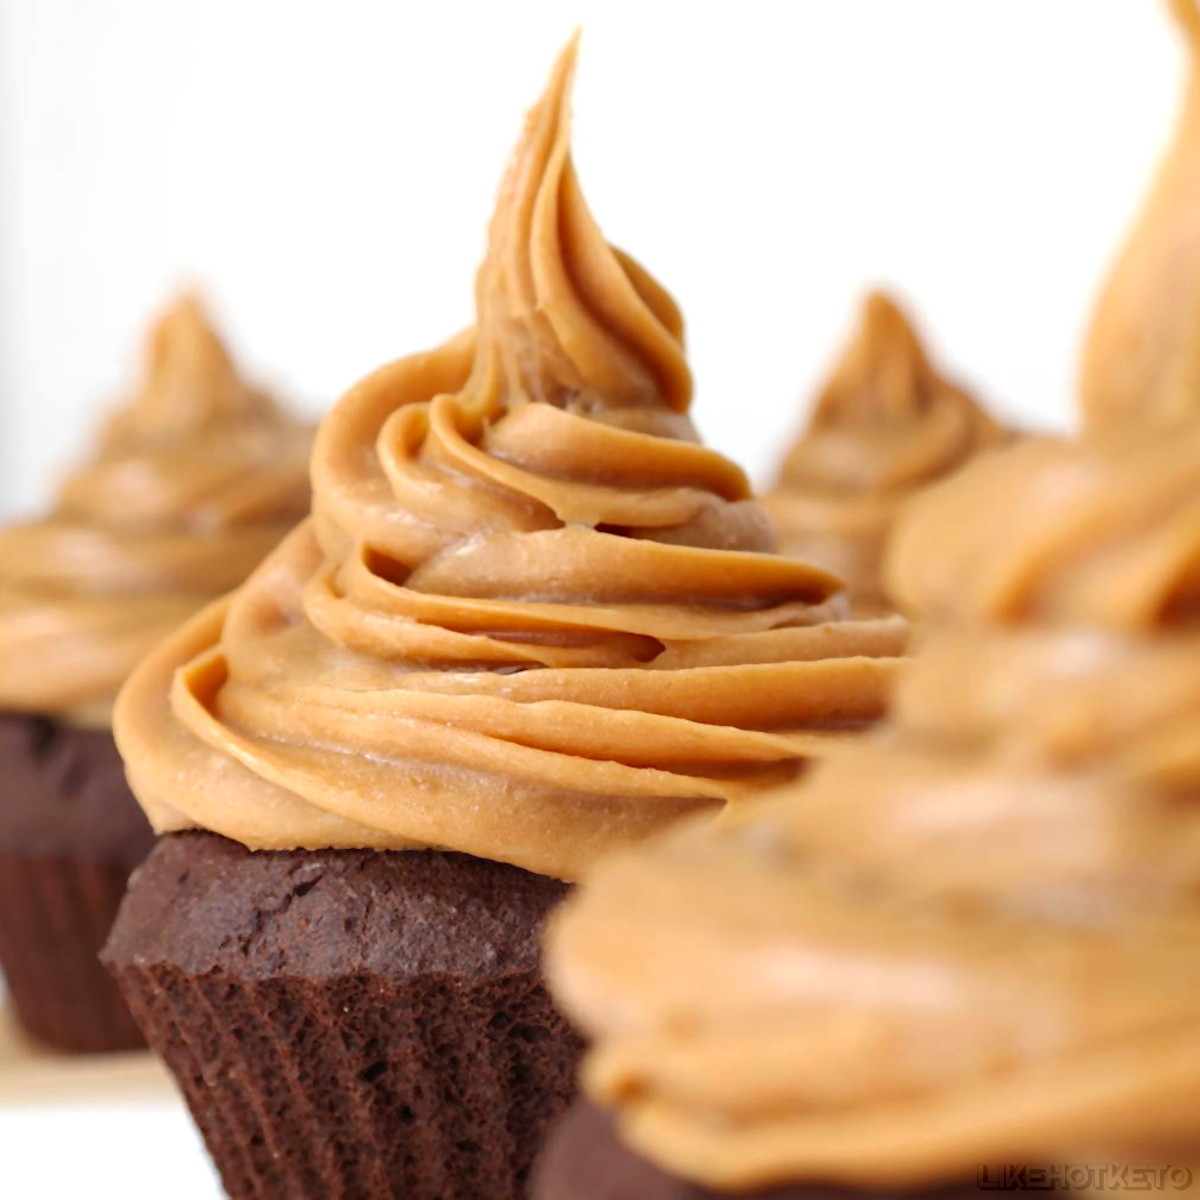 Low-carb chocolate cupcake with peanut butter whey protein frosting.